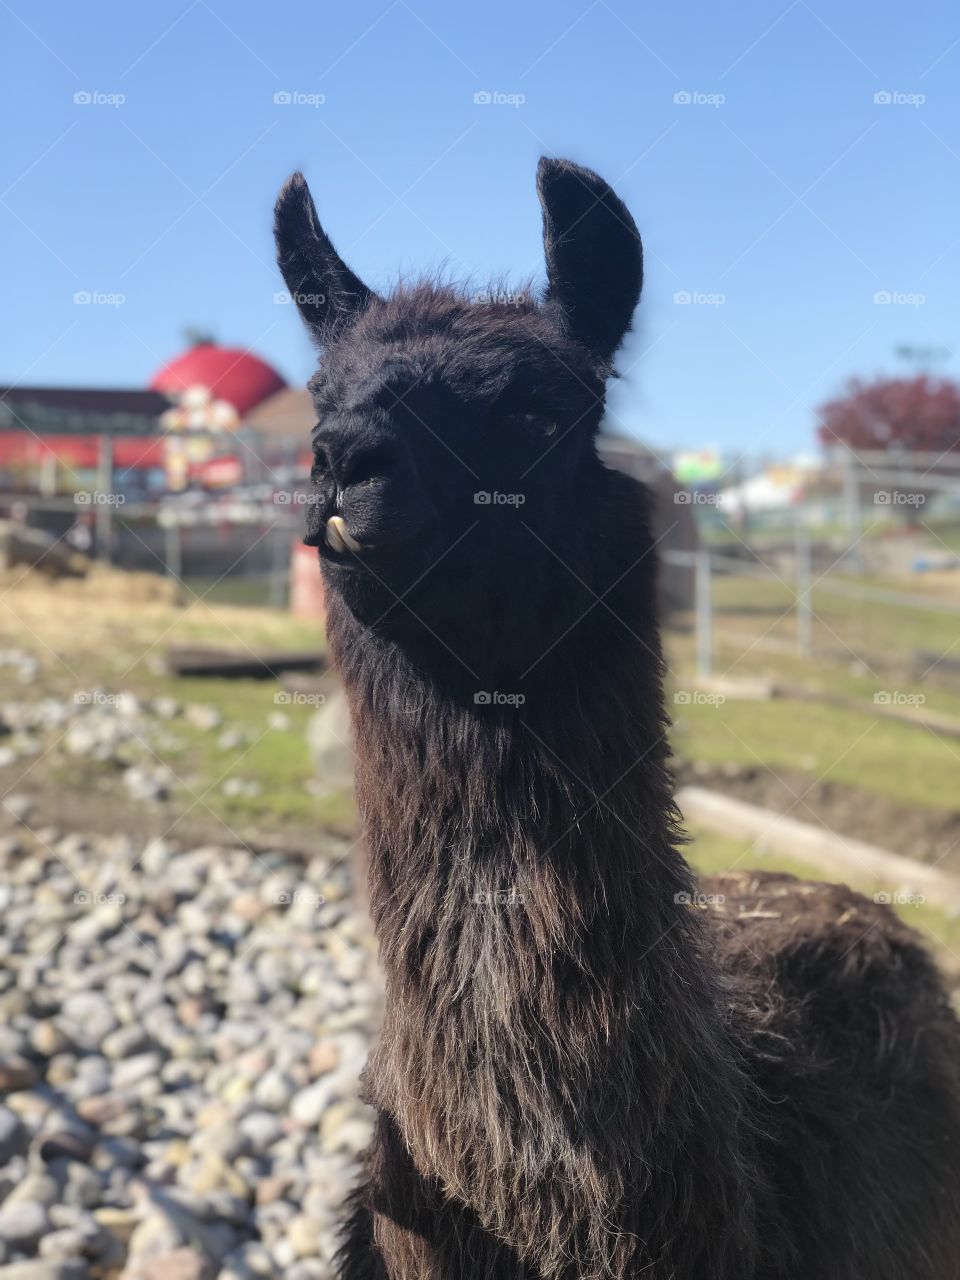 Lama, the real boss of the petting zoo, enjoying the outdoors after a busy day with clients.